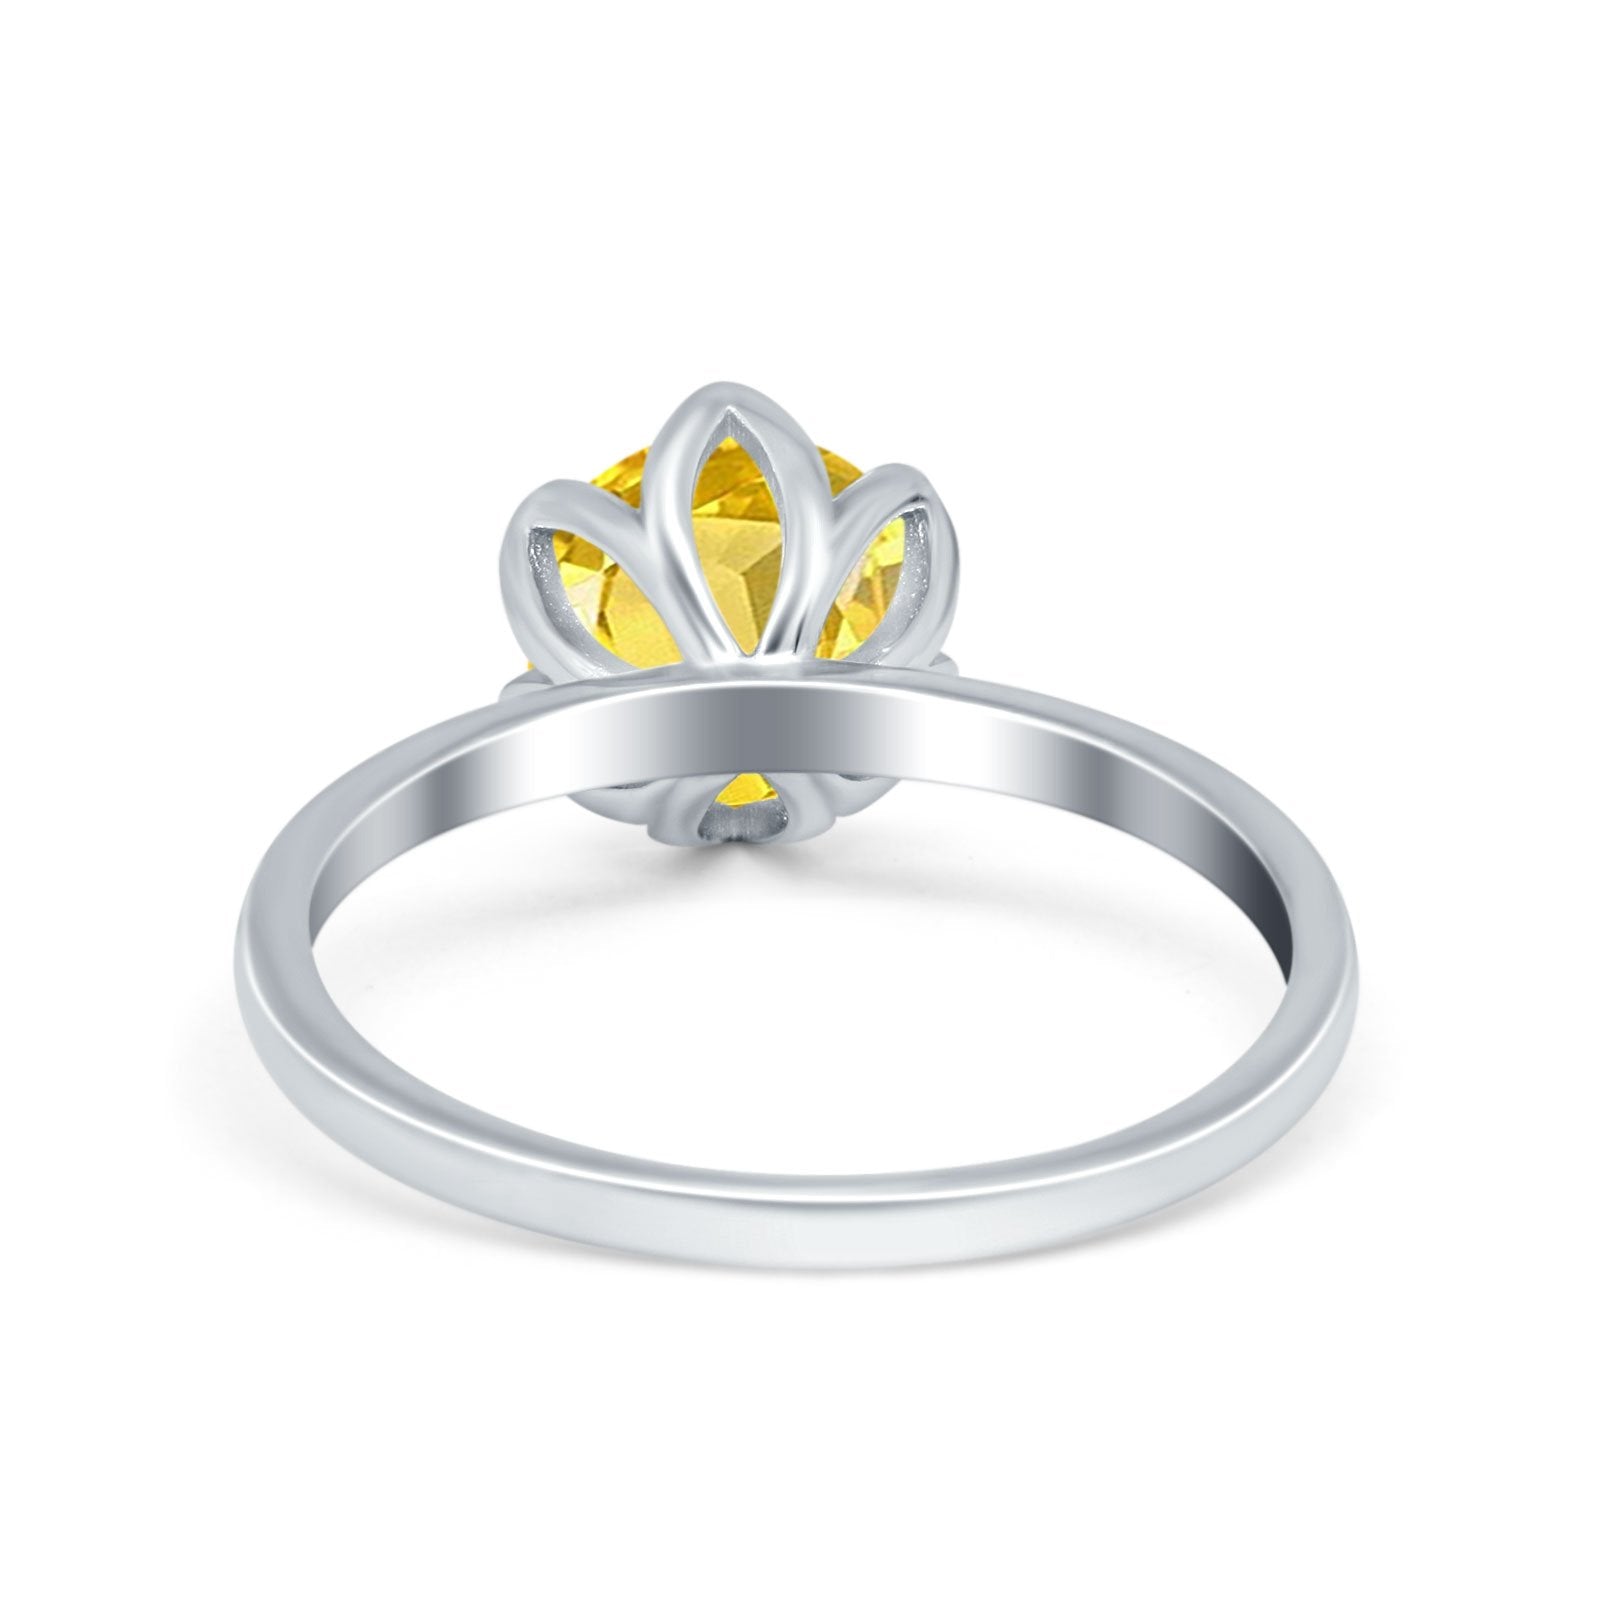 Flower Solitaire Wedding Ring Simulated Cubic Zirconia 925 Sterling Silver